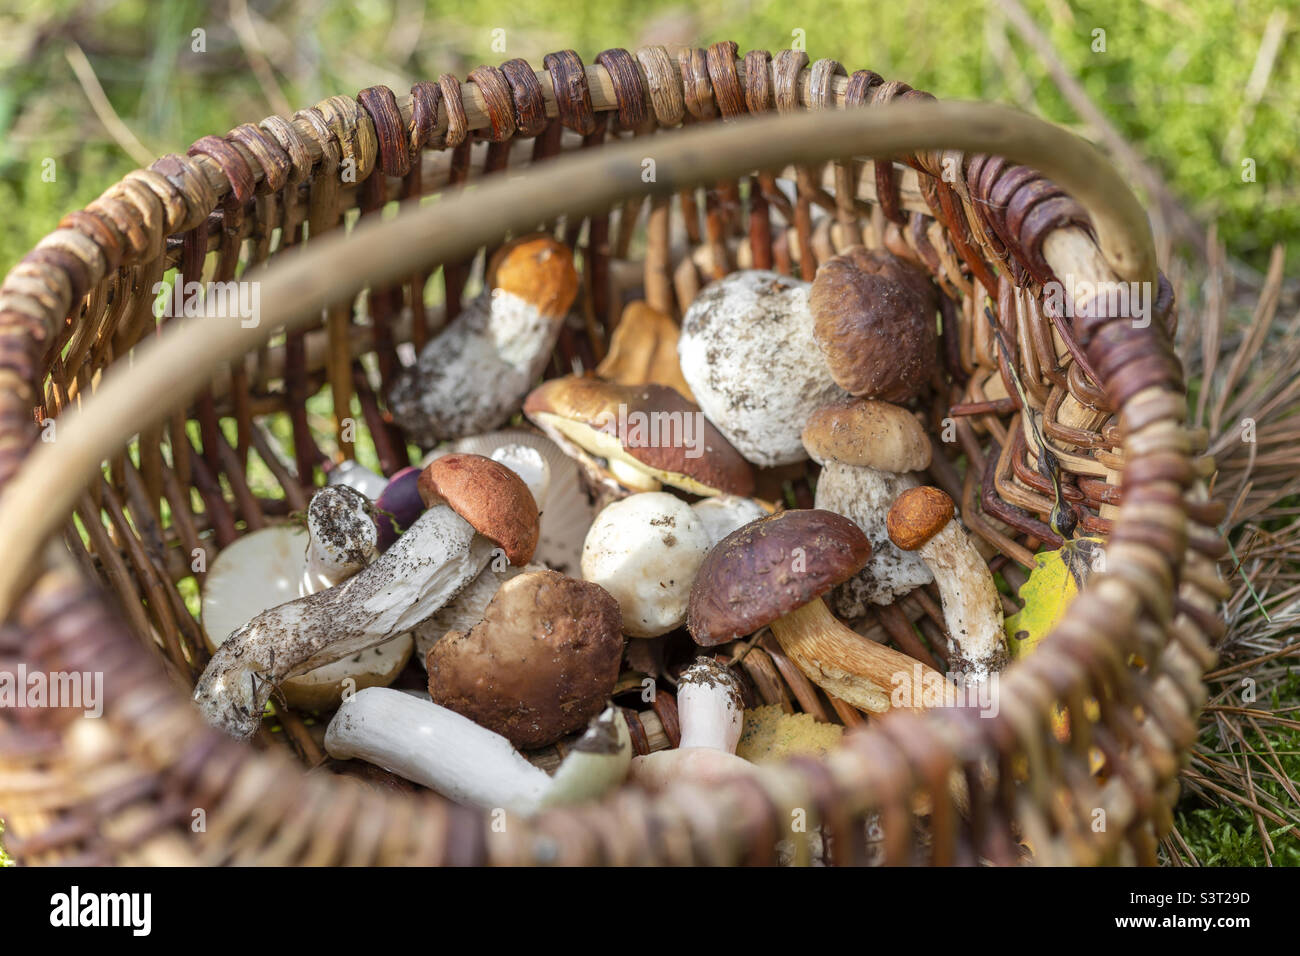 Basket of edible mushrooms, picked from the forest in autumn Stock Photo